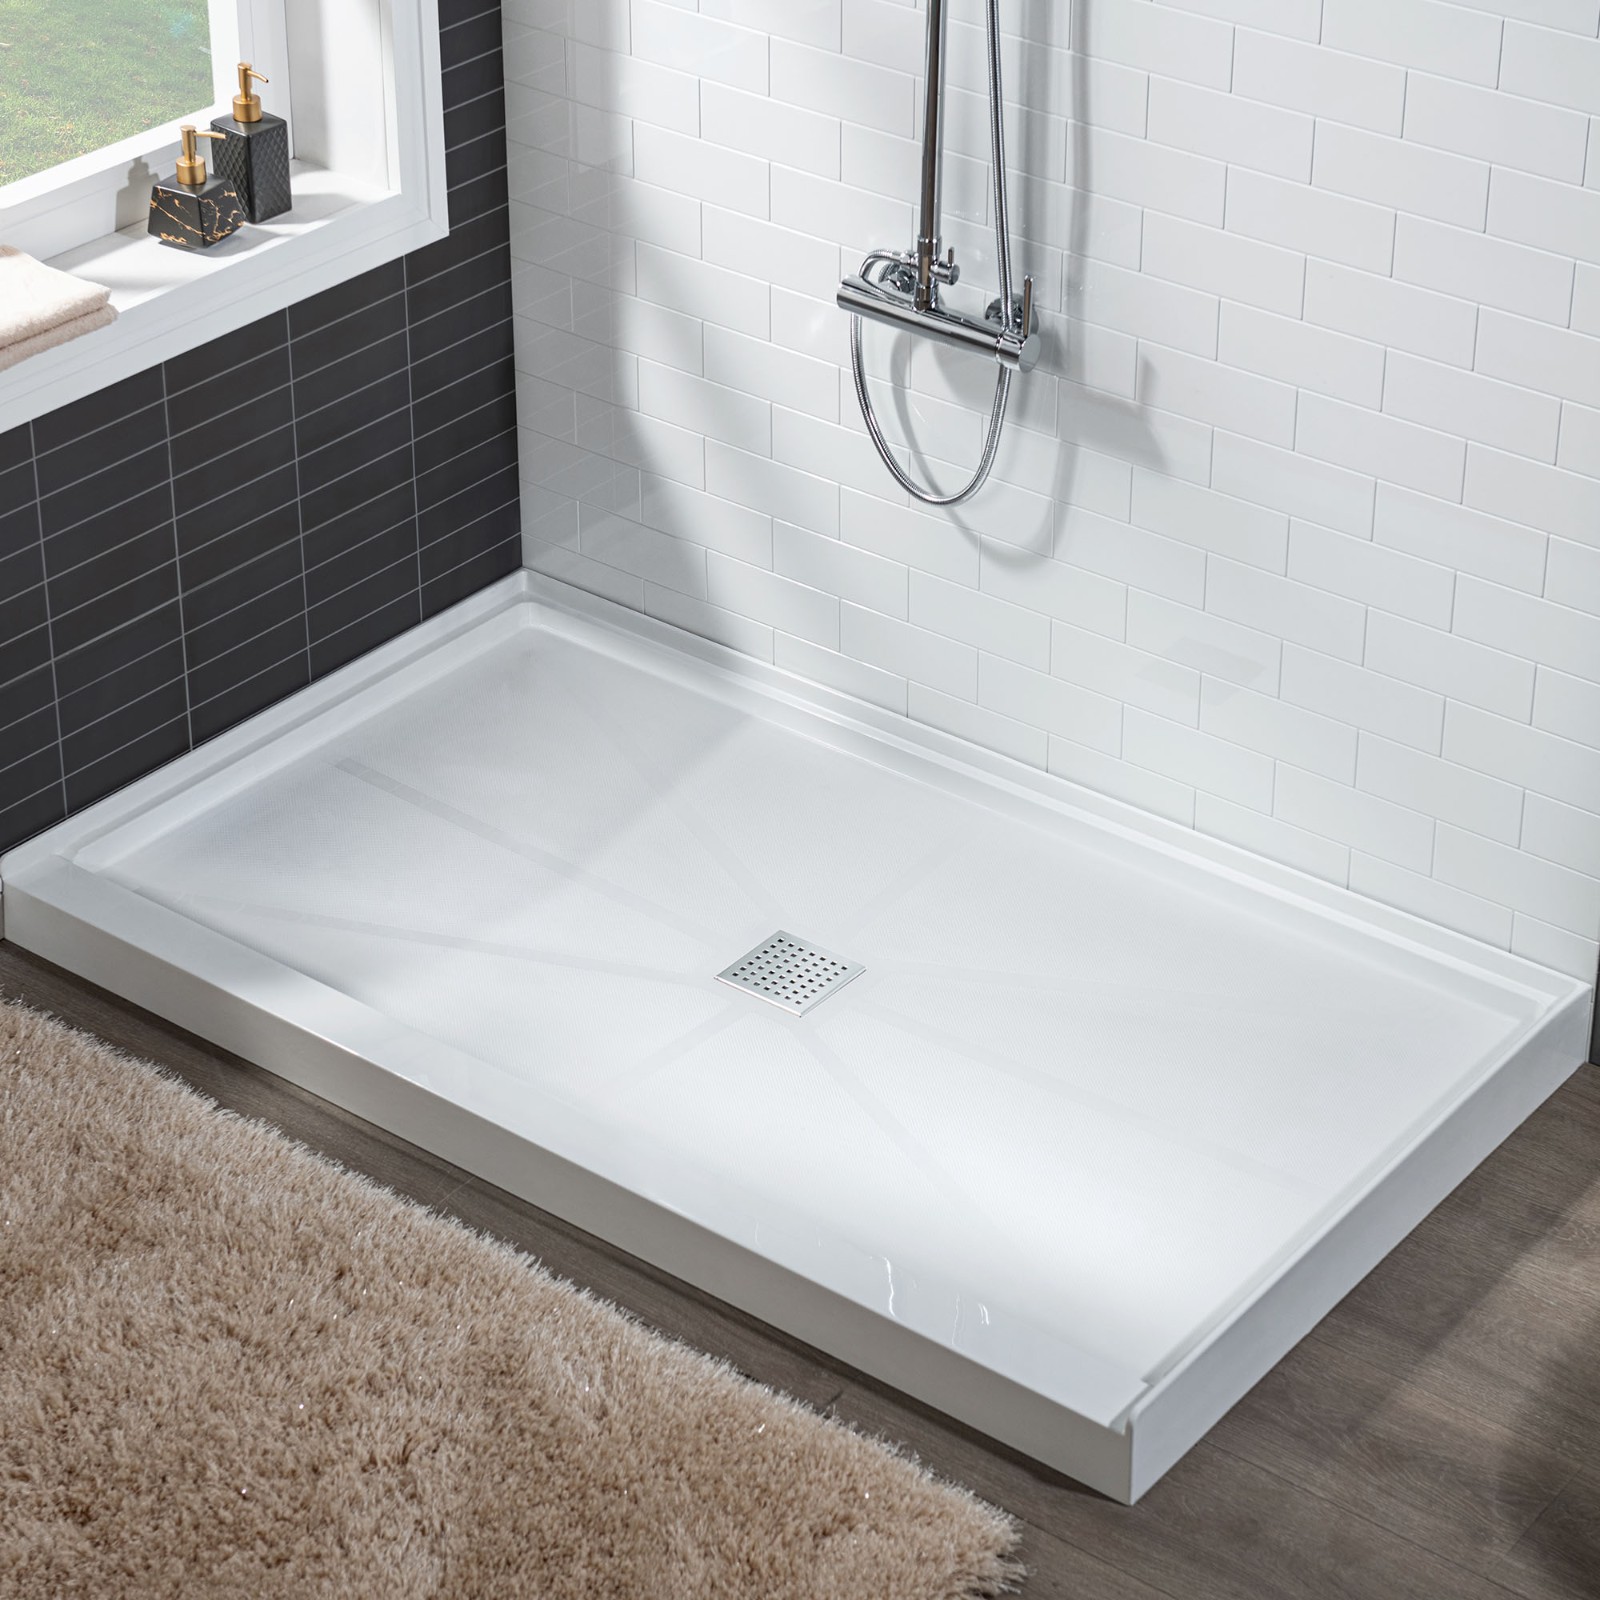  WOODBRIDGE SBR4832-1000C-CH SolidSurface Shower Base with Recessed Trench Side Including  Chrome Linear Cover, 48